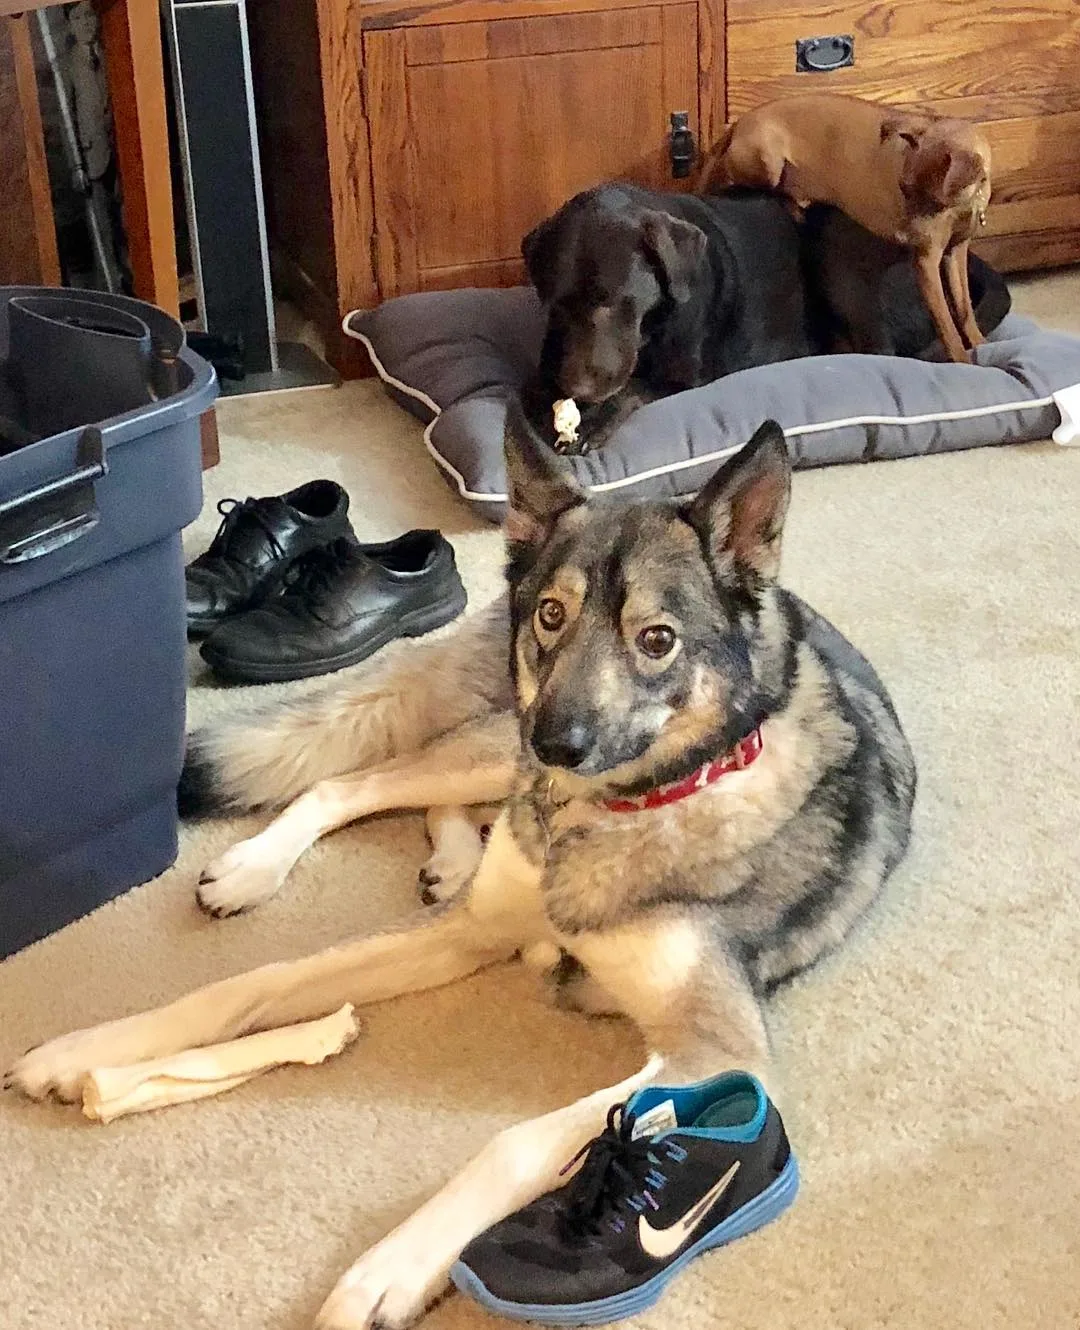 Coyote Husky Mix lies on the floor while the other dogs play